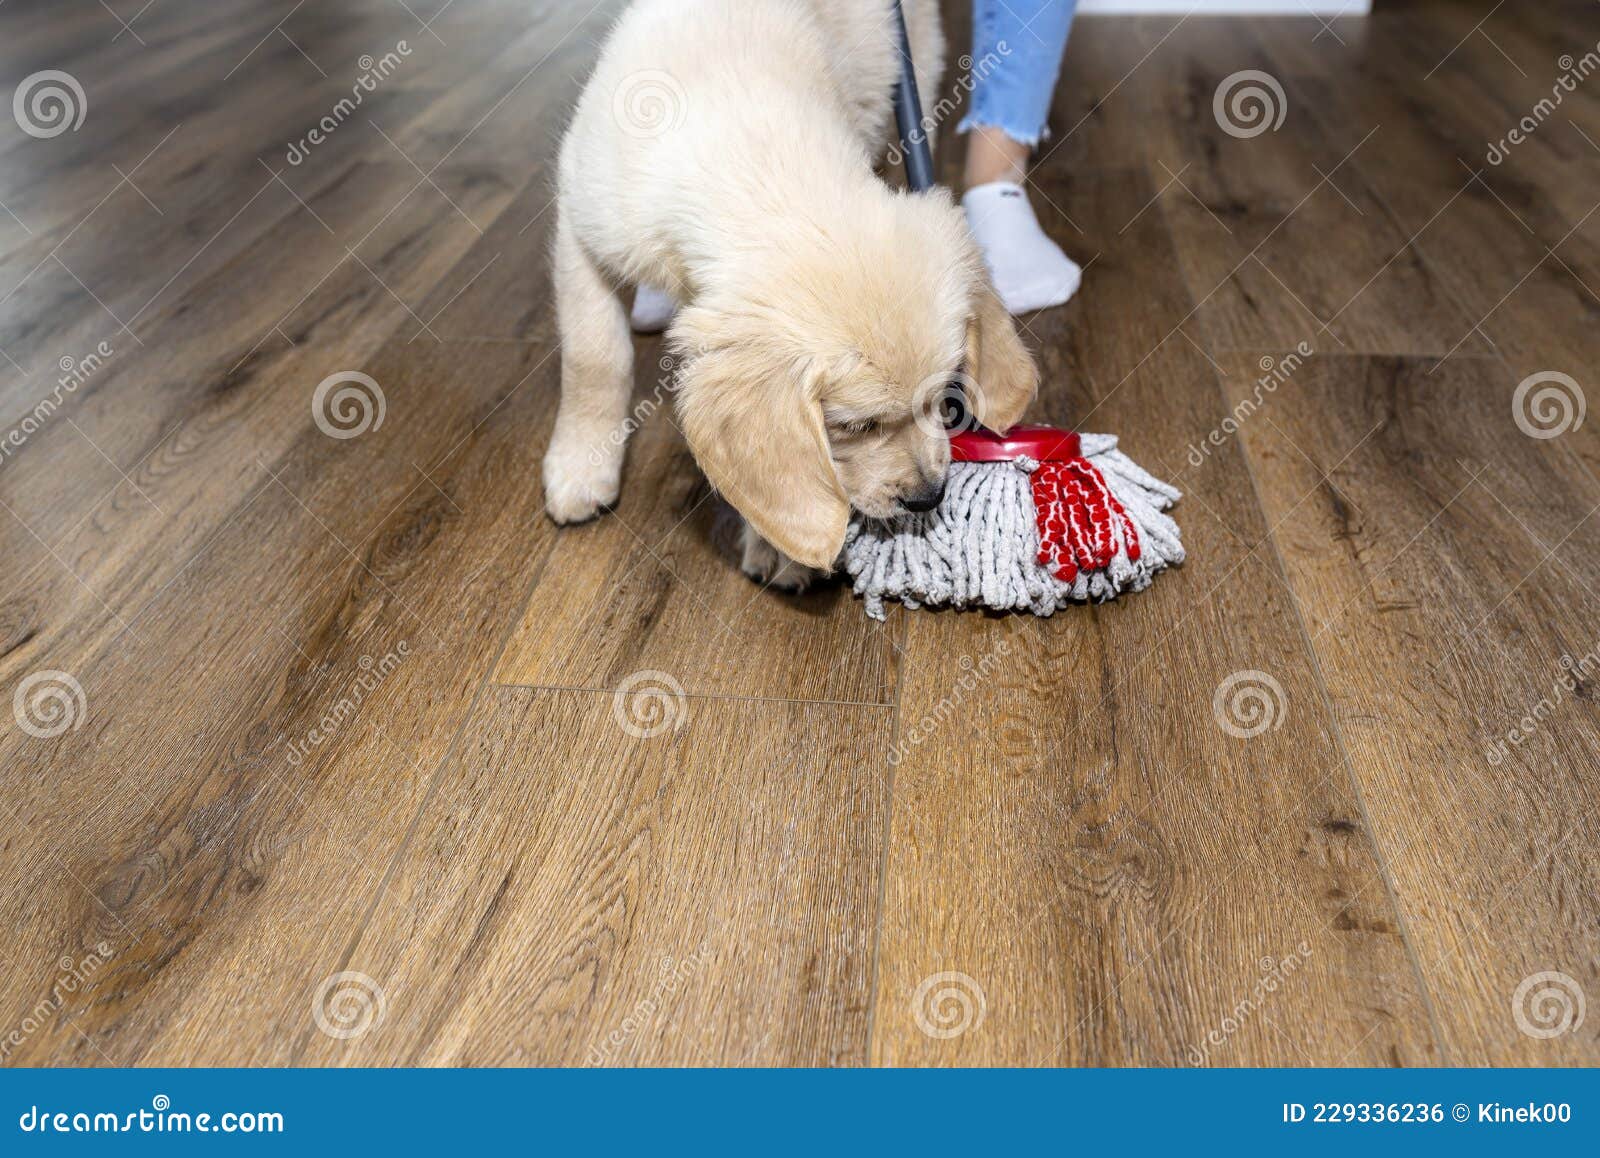 a woman wiping piss on a puppy off modern water resistant vinyl panels with a mop, next to a disturbing puppy.